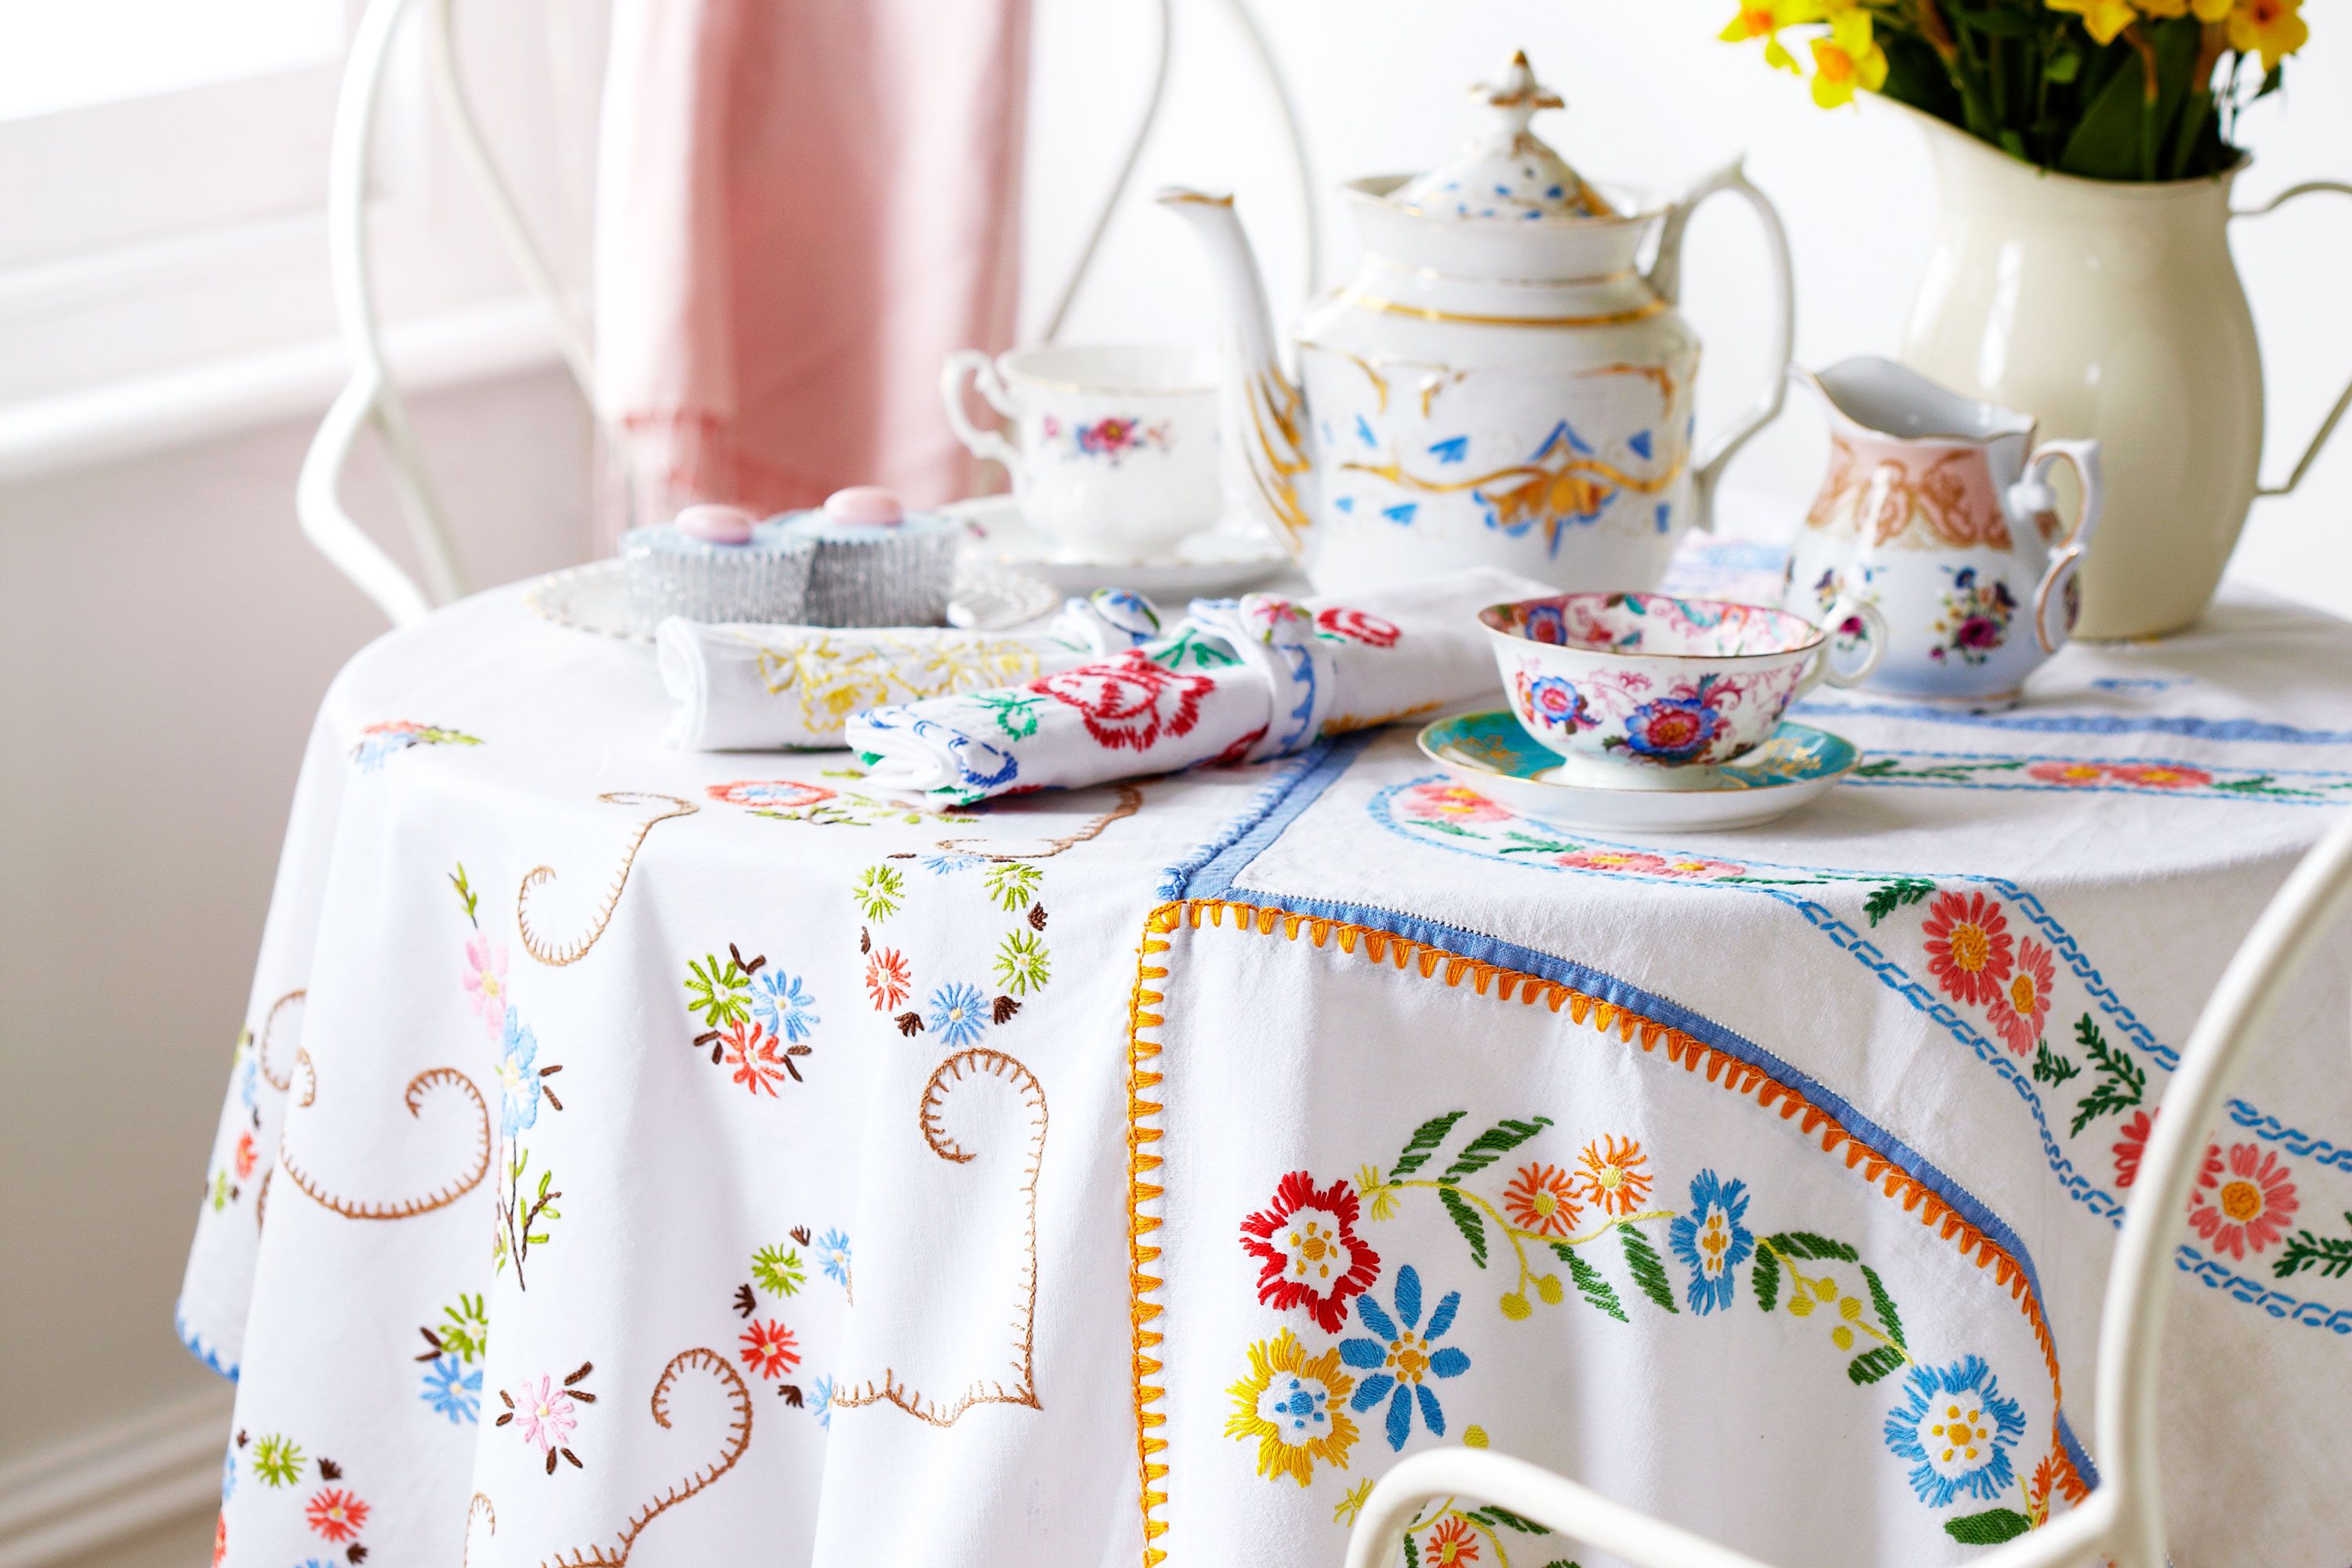 tablecloths and napkins